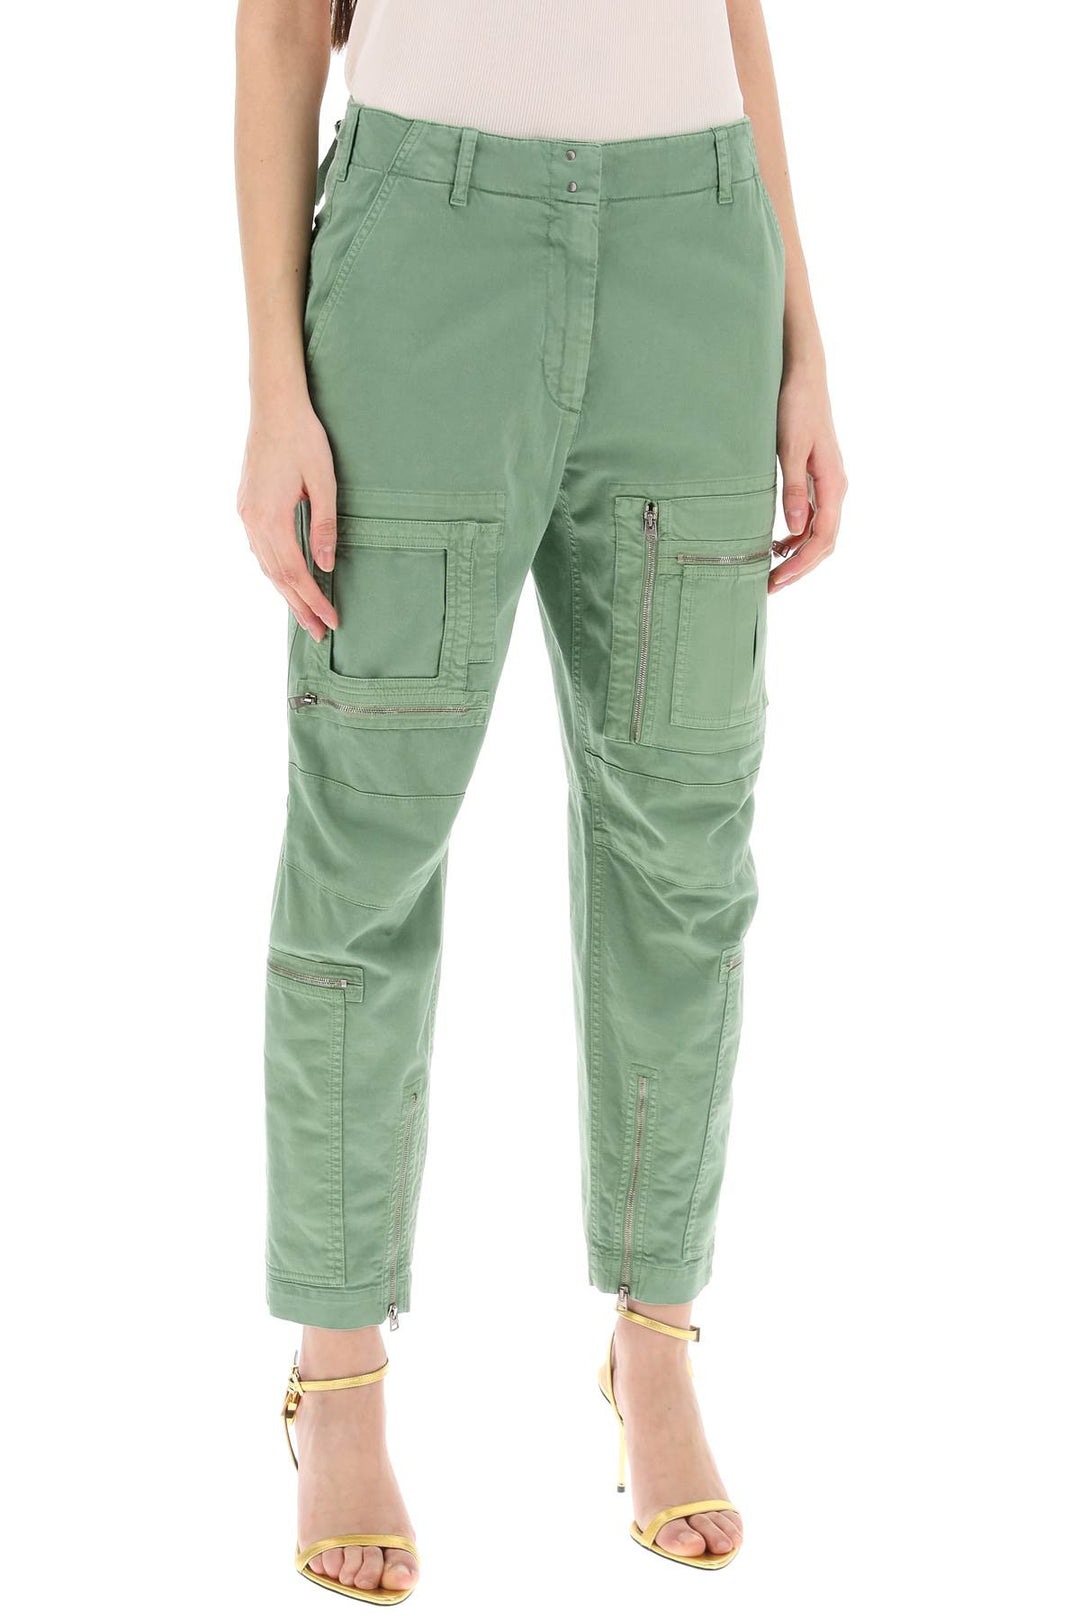 Tom Ford Tapered Cargo Pants   Verde